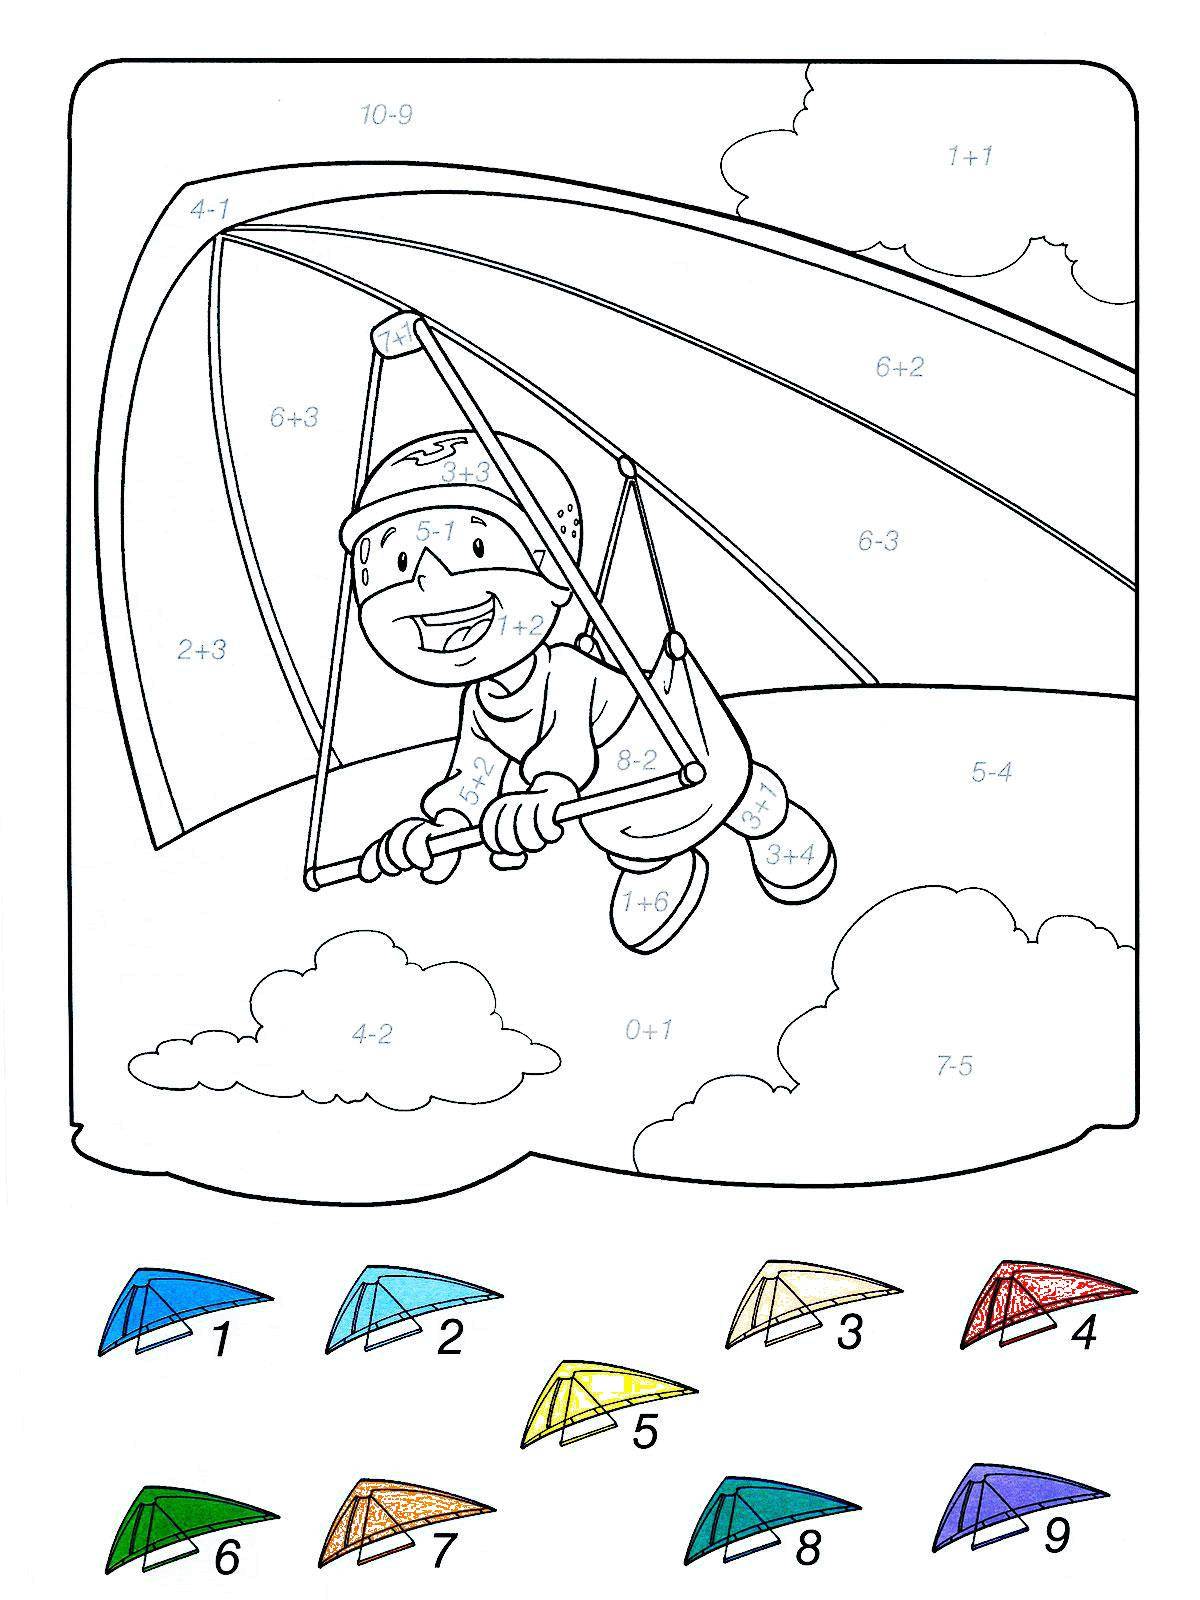 Coloring Color the boy on the airplane deciding examples. Category mathematical coloring pages. Tags:  examples, aeroplane, boy.